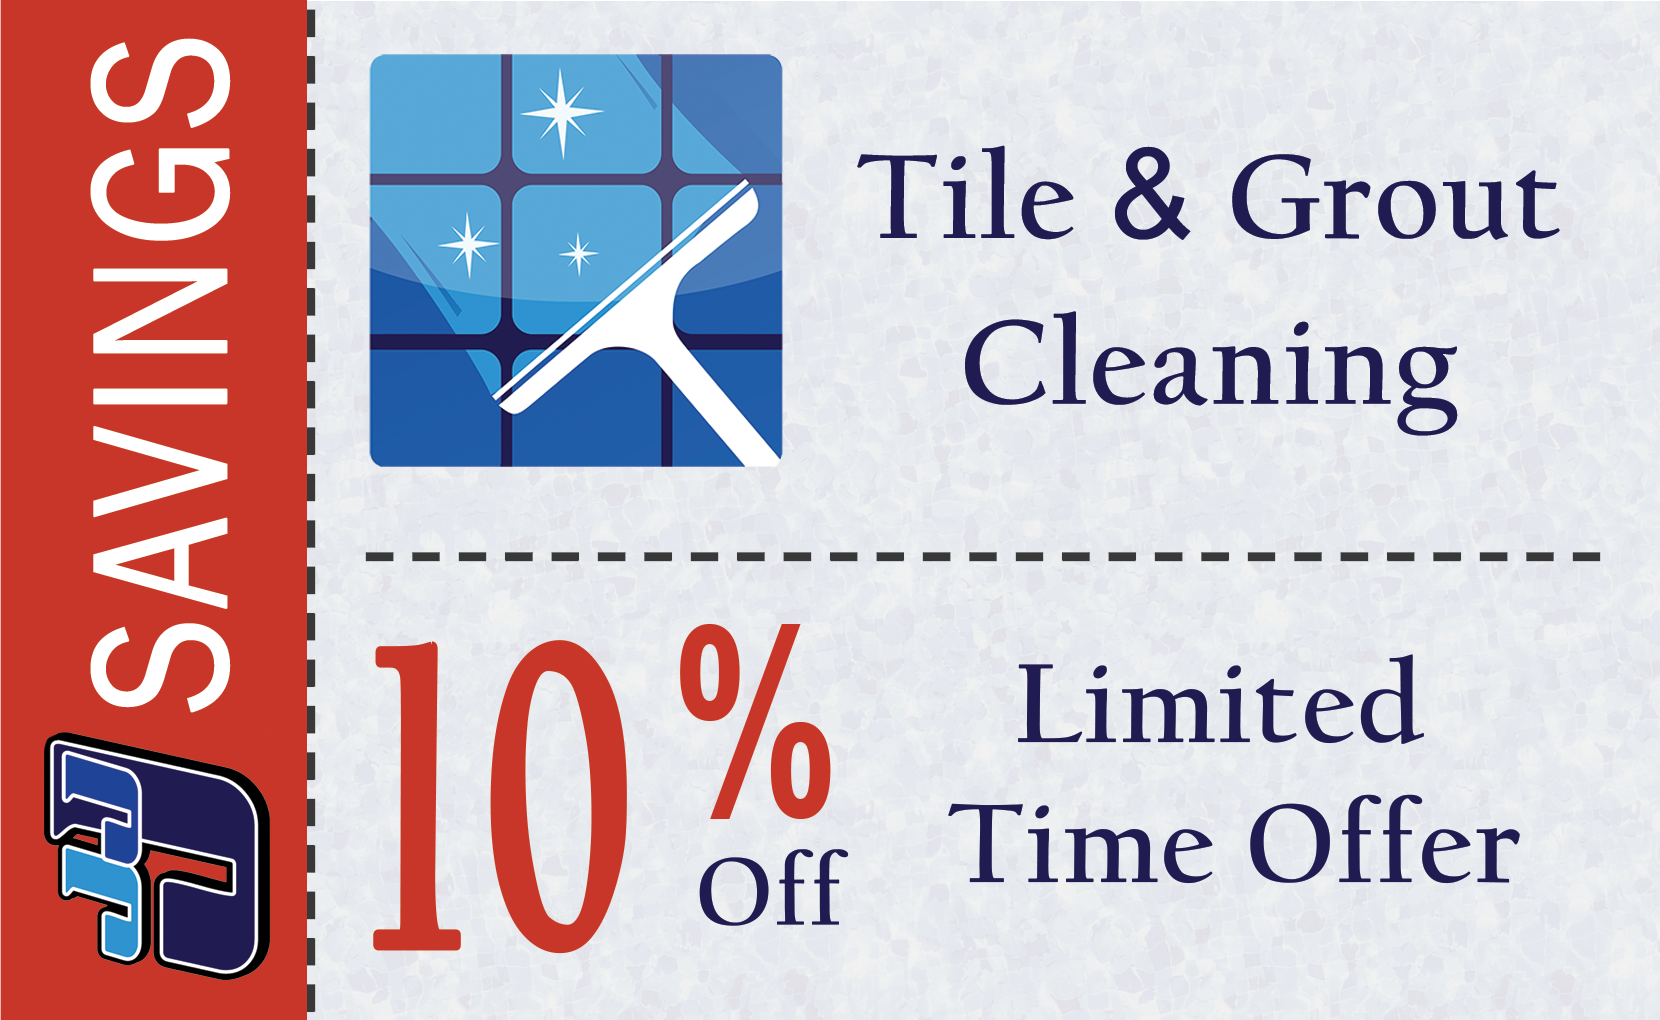 tile & grout cleaning coupon Las Vegas